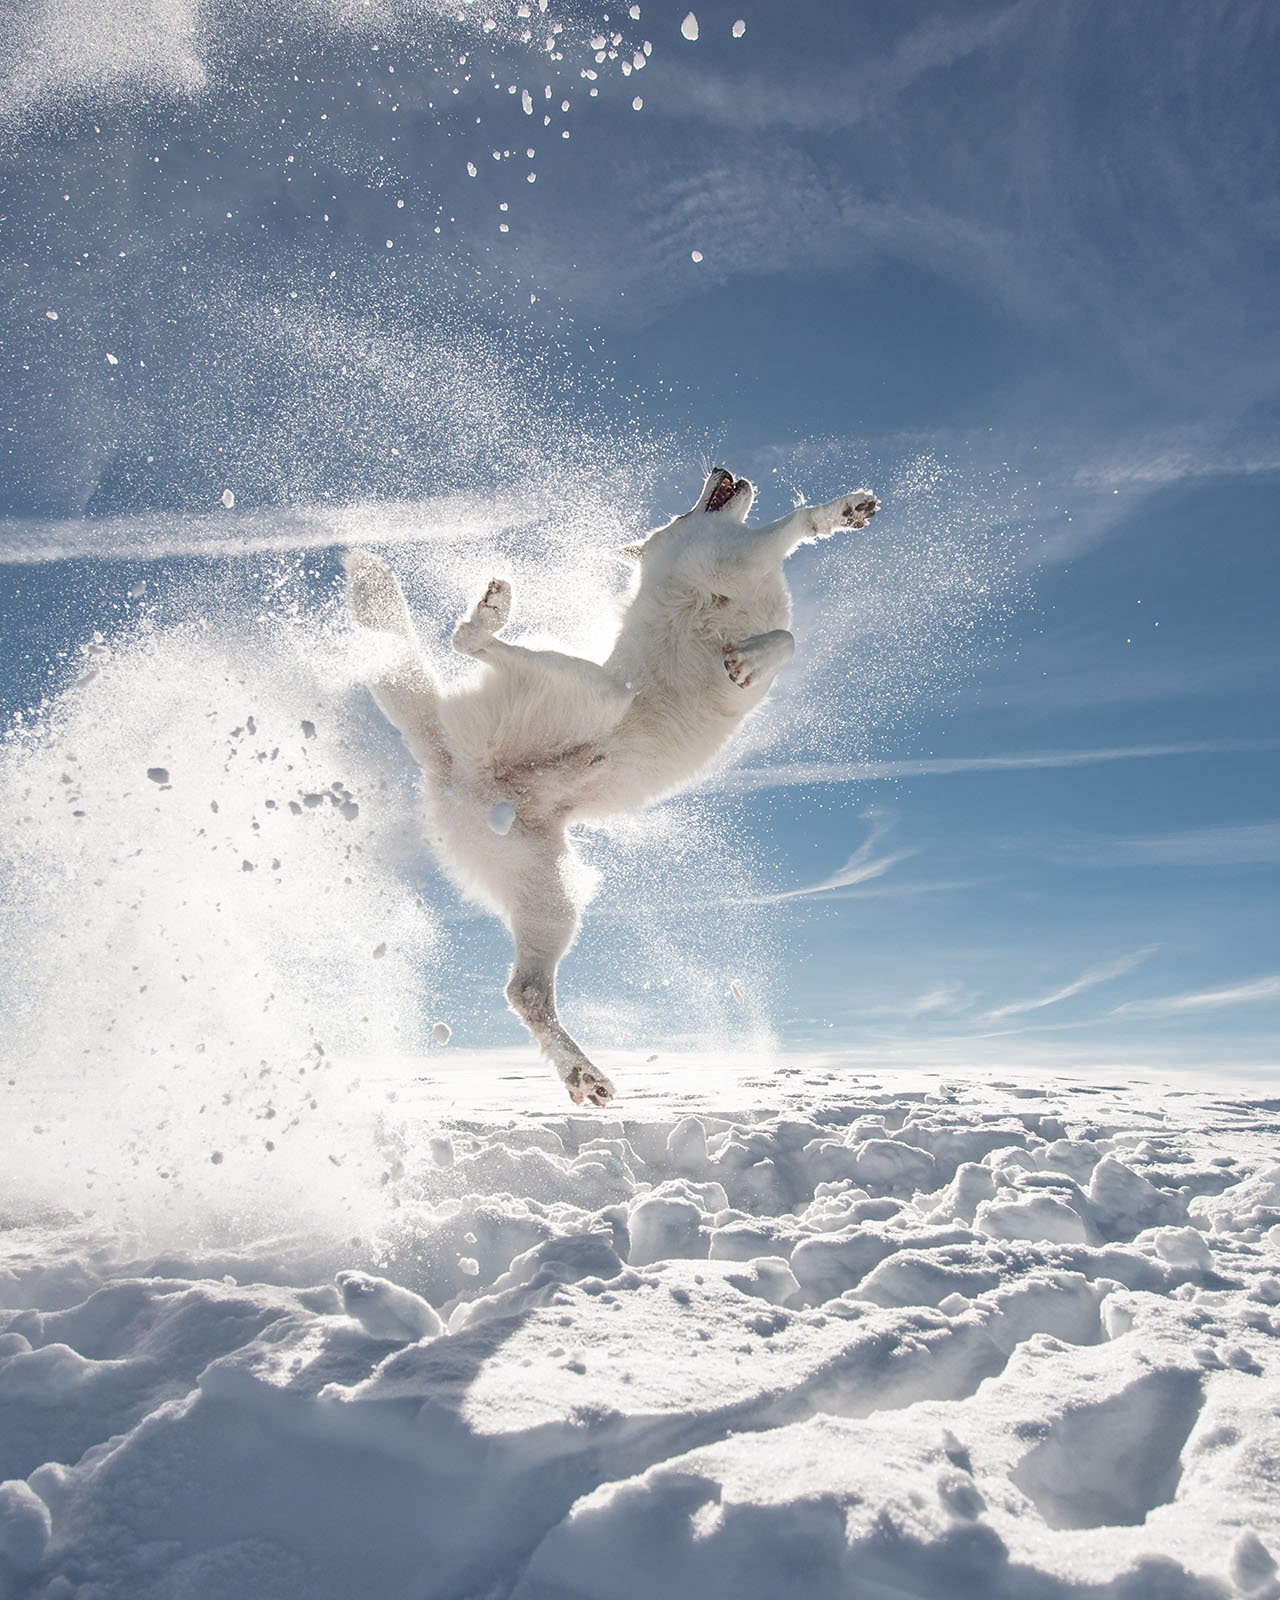 A white dog joyfully leaps into the air, surrounded by a spray of snow on a sunny day in a snow-covered landscape. The sky is bright blue with wispy clouds, accentuating the dog's playful and energetic jump as it appears to be having fun.